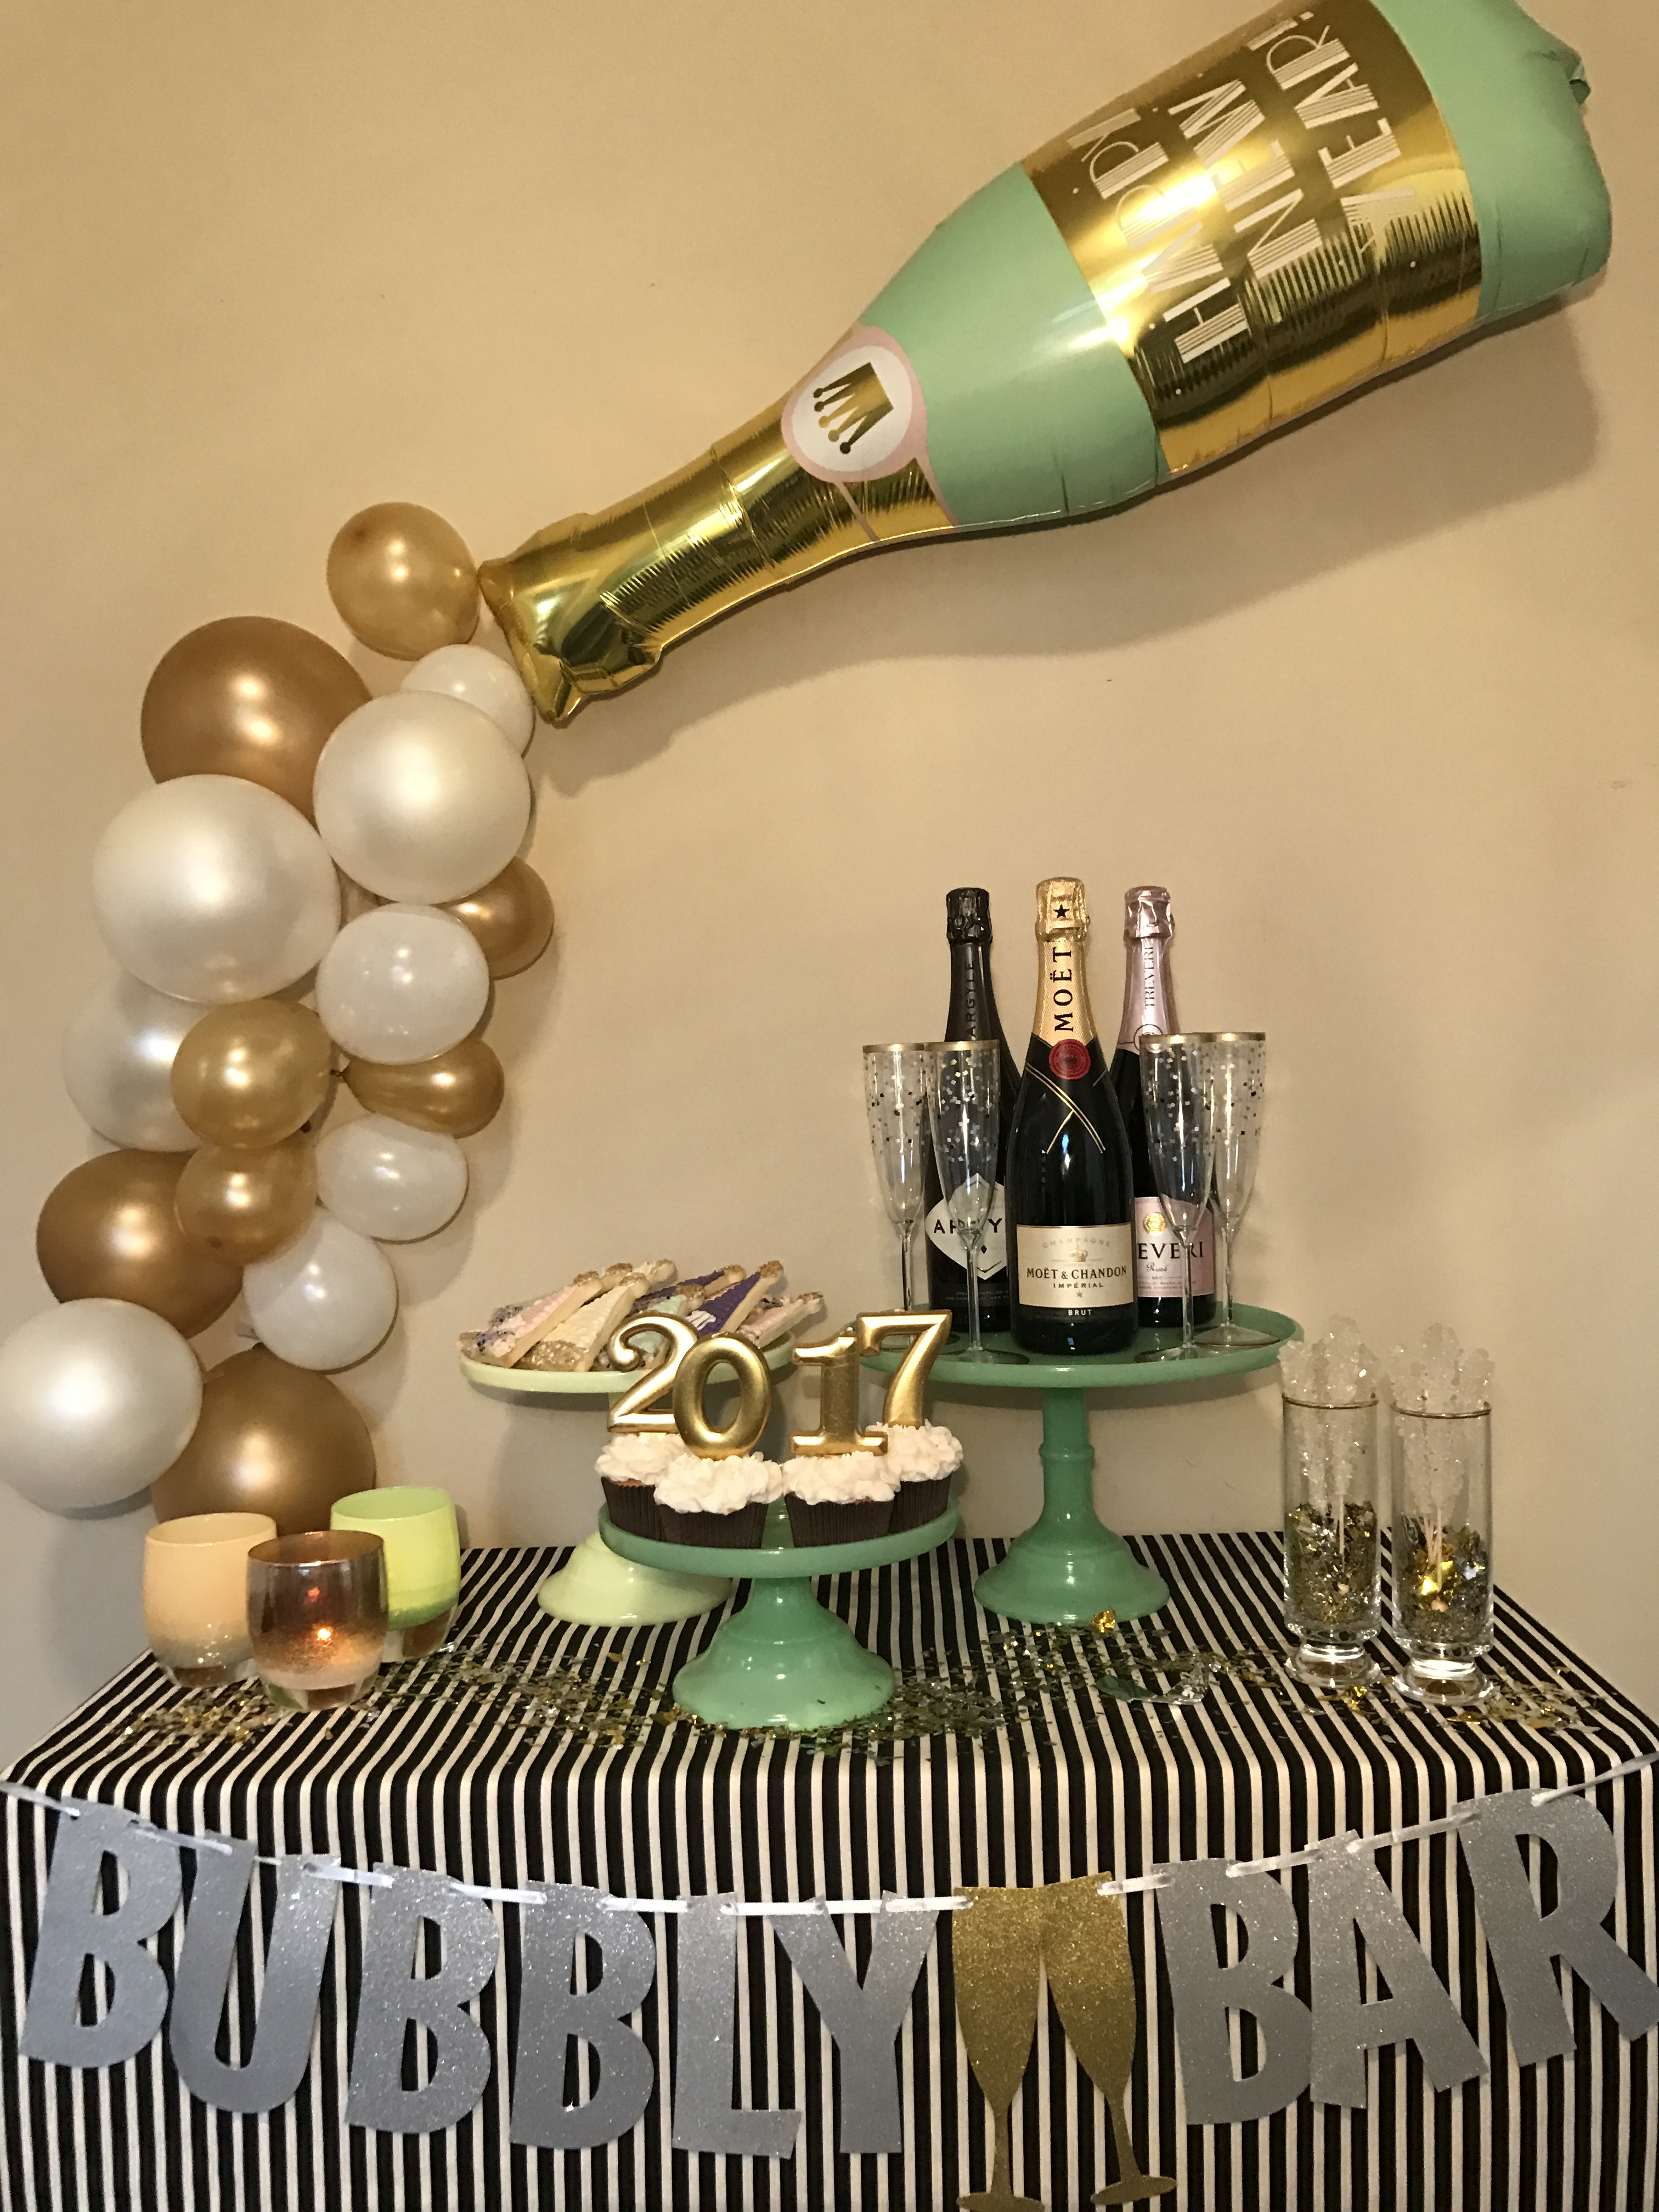 https://juliewendell.com/2016/12/29/creating-a-bubbly-bar/bubbly-bar-18/